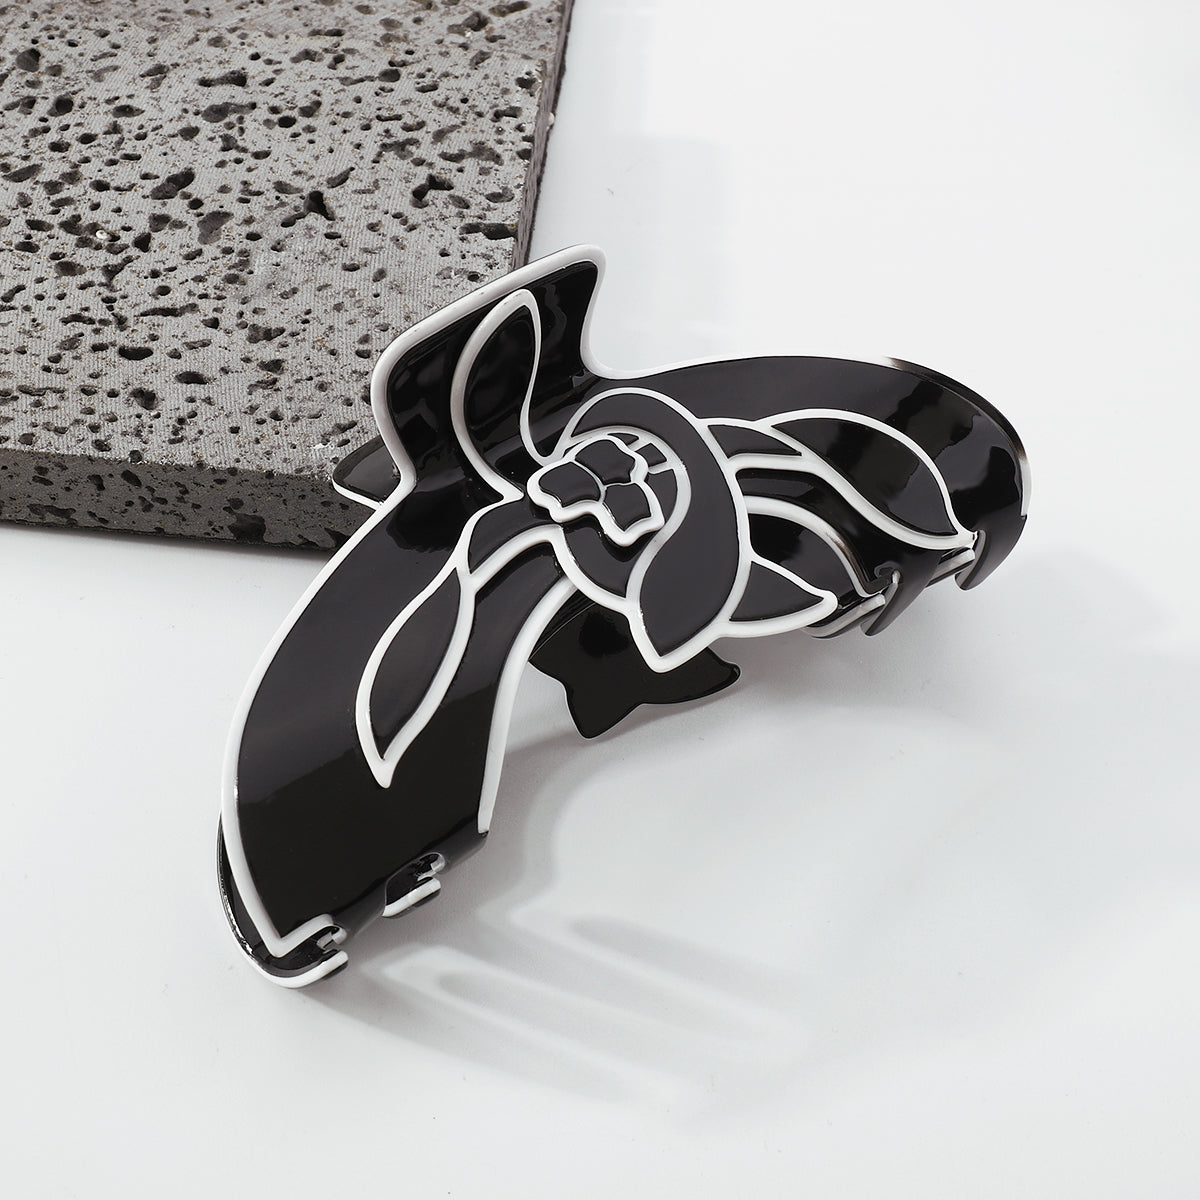 Black White Acetate Flower Shape Hair Claw Clip medyjewelry